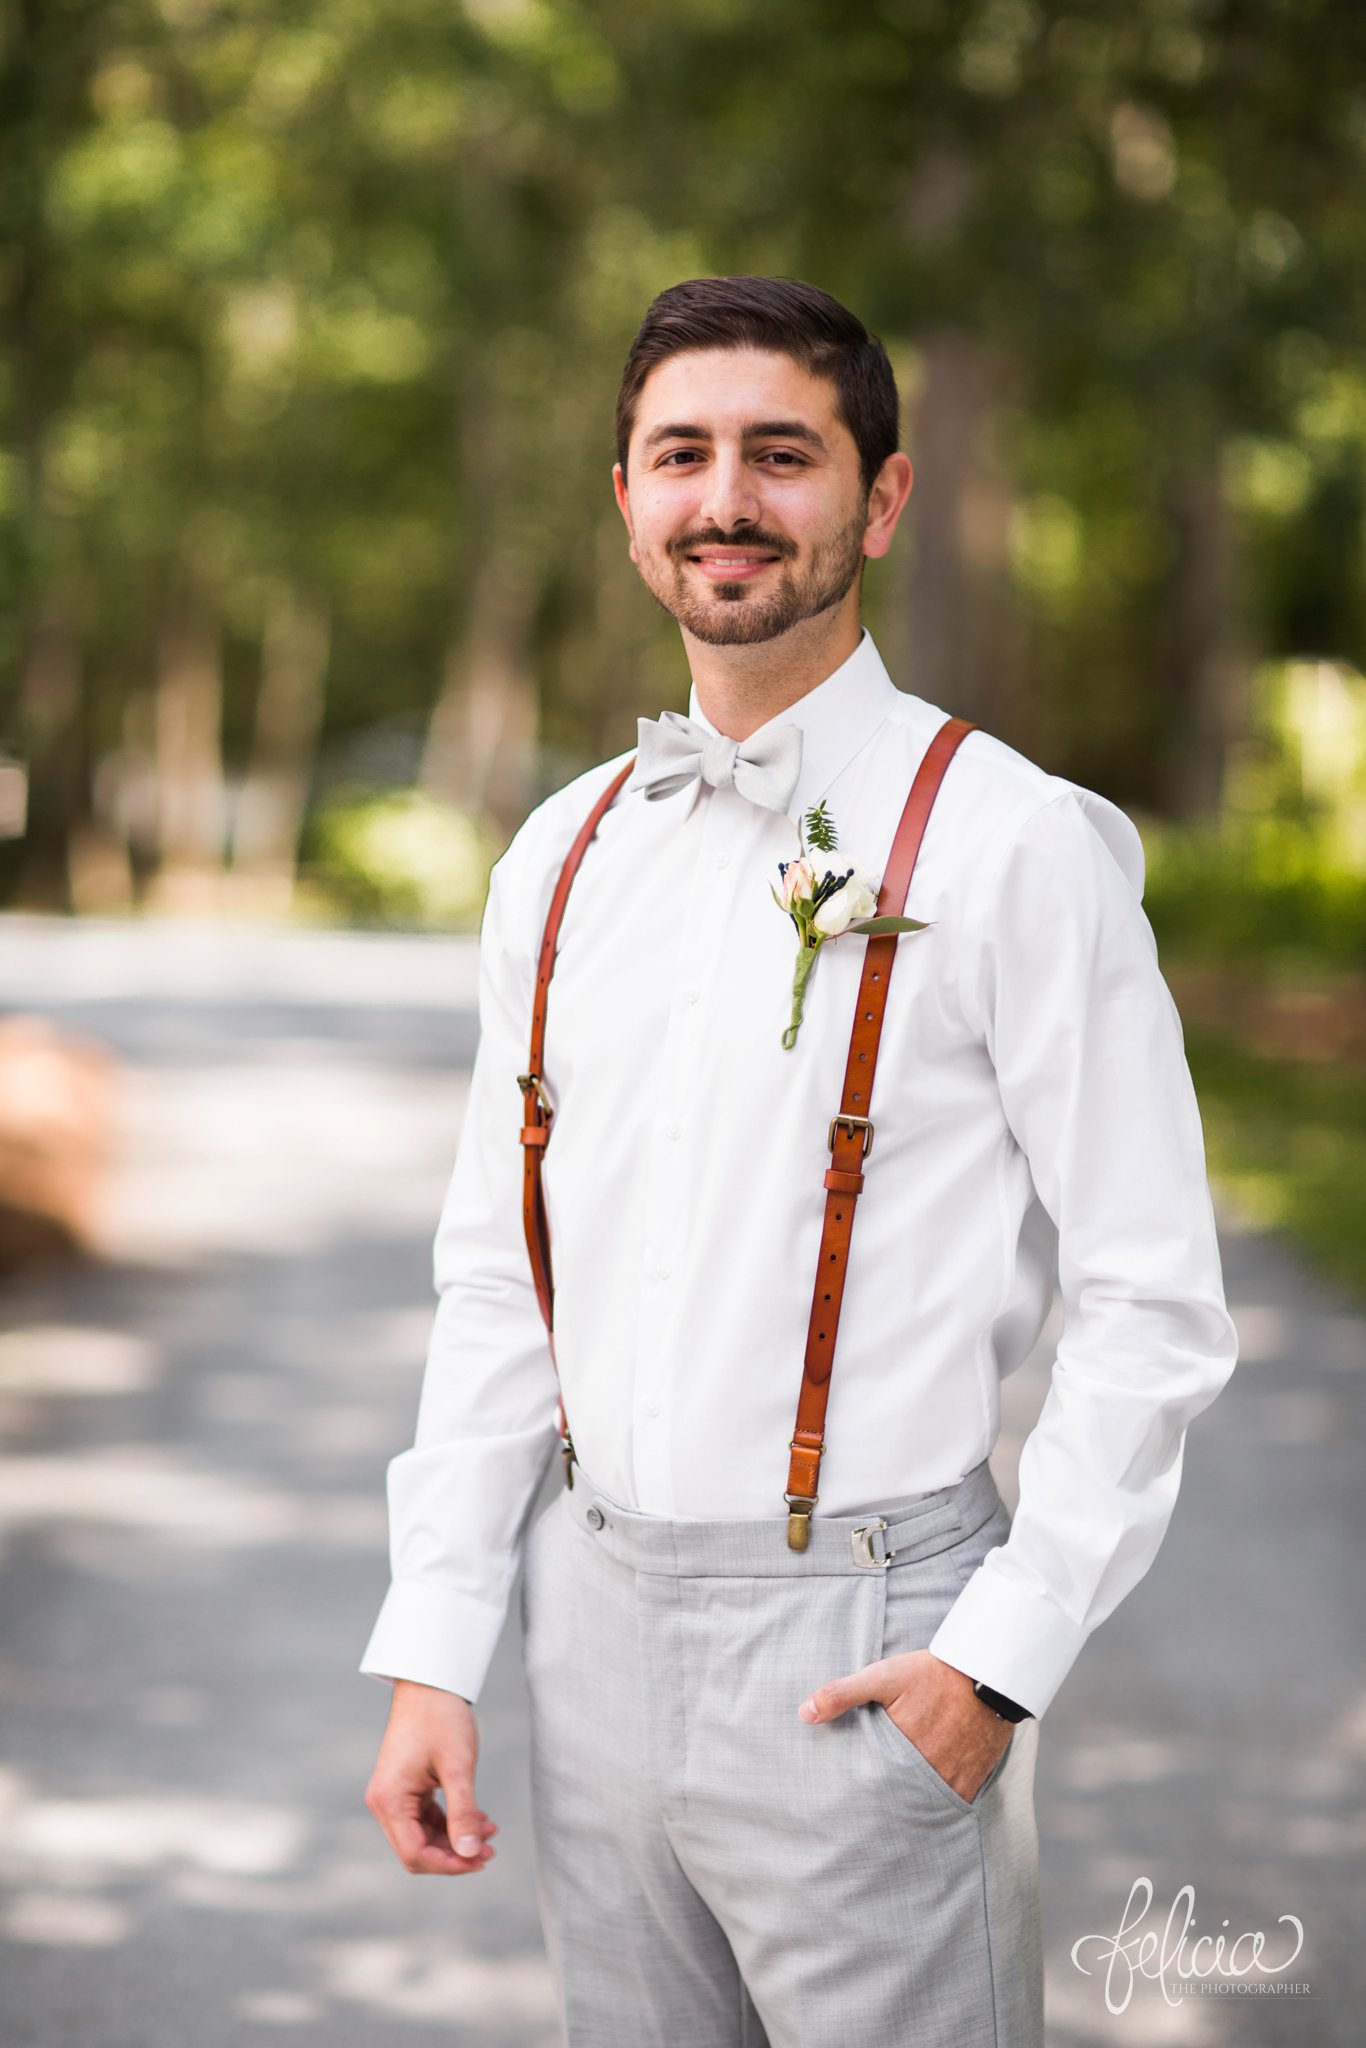 images by feliciathephotographer.com | destination wedding | the makey house | dave gibson coordinator | travel photographer | Savannah, georgia | southern | groom | pre-ceremony | details | boutonniere | brown suspenders | gray pants | bow tie | portrait 